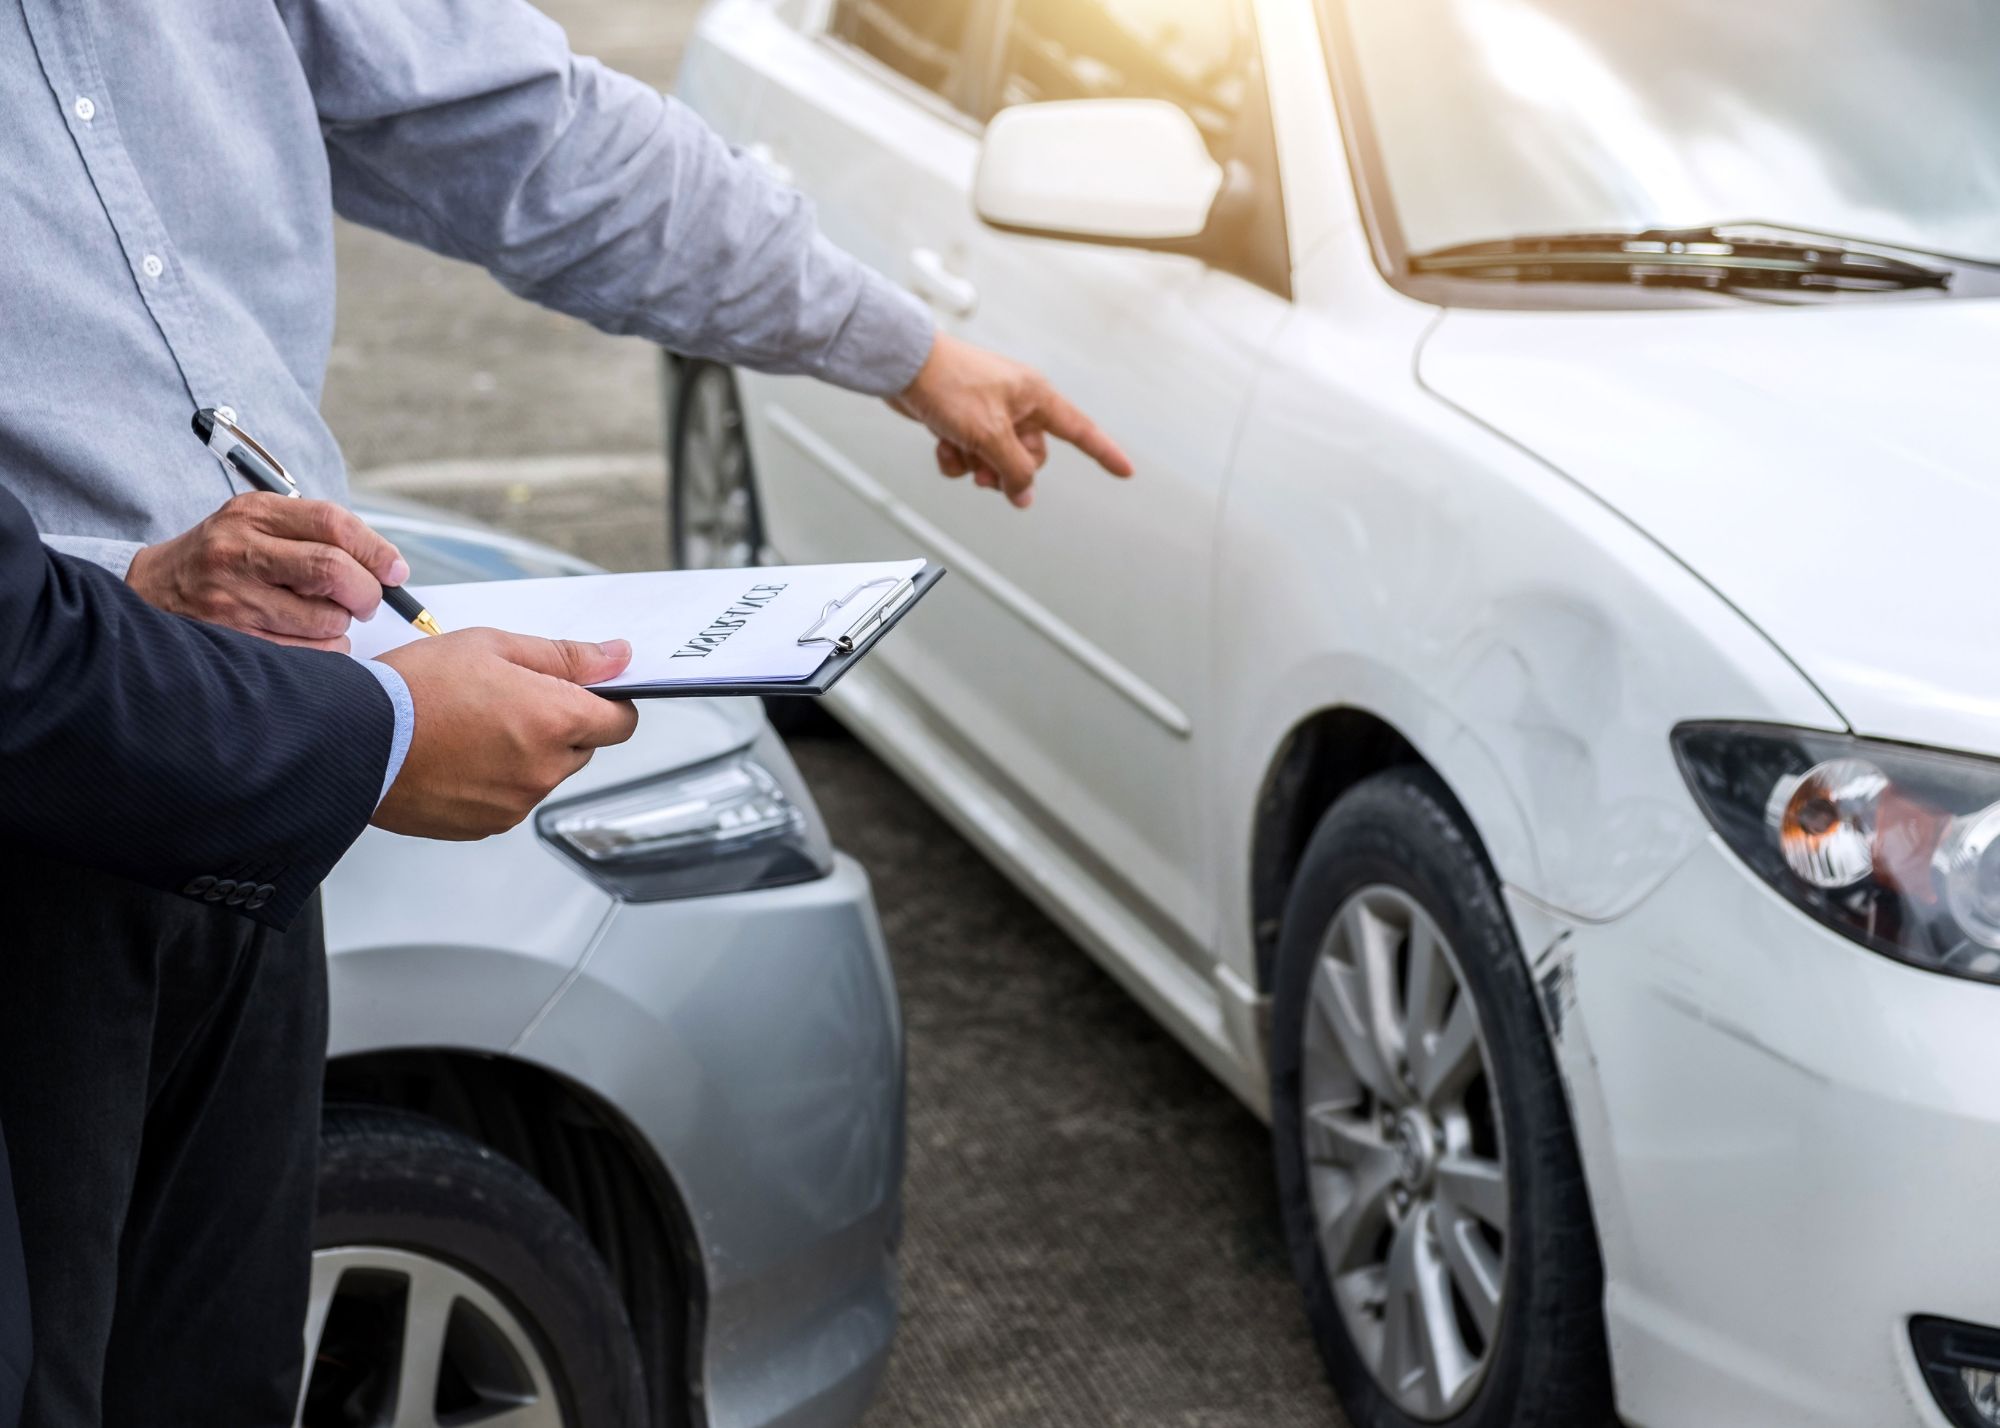 SR22 state car coverage is a type of auto insurance required for high-risk drivers in order to maintain their driving privileges. It is commonly used in Nashville, TN to fulfill legal requirements.